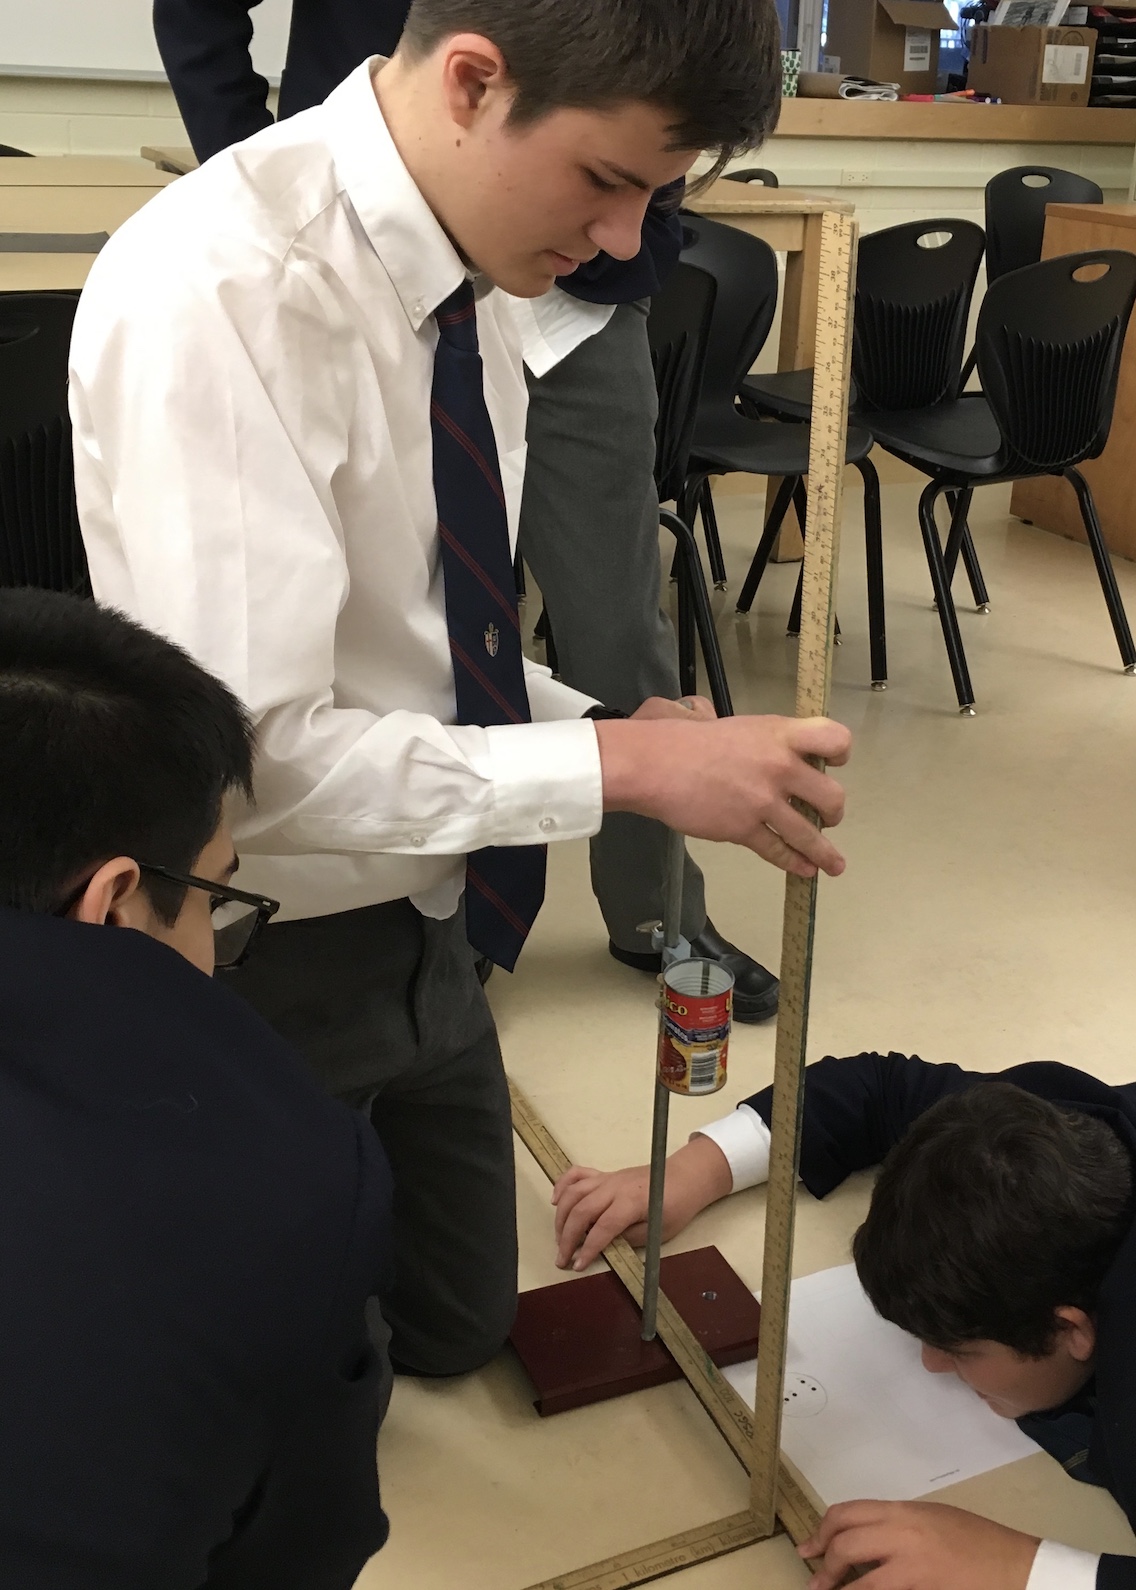 Students measure the height of the tomato paste can that is attached to a lab or retort stand.